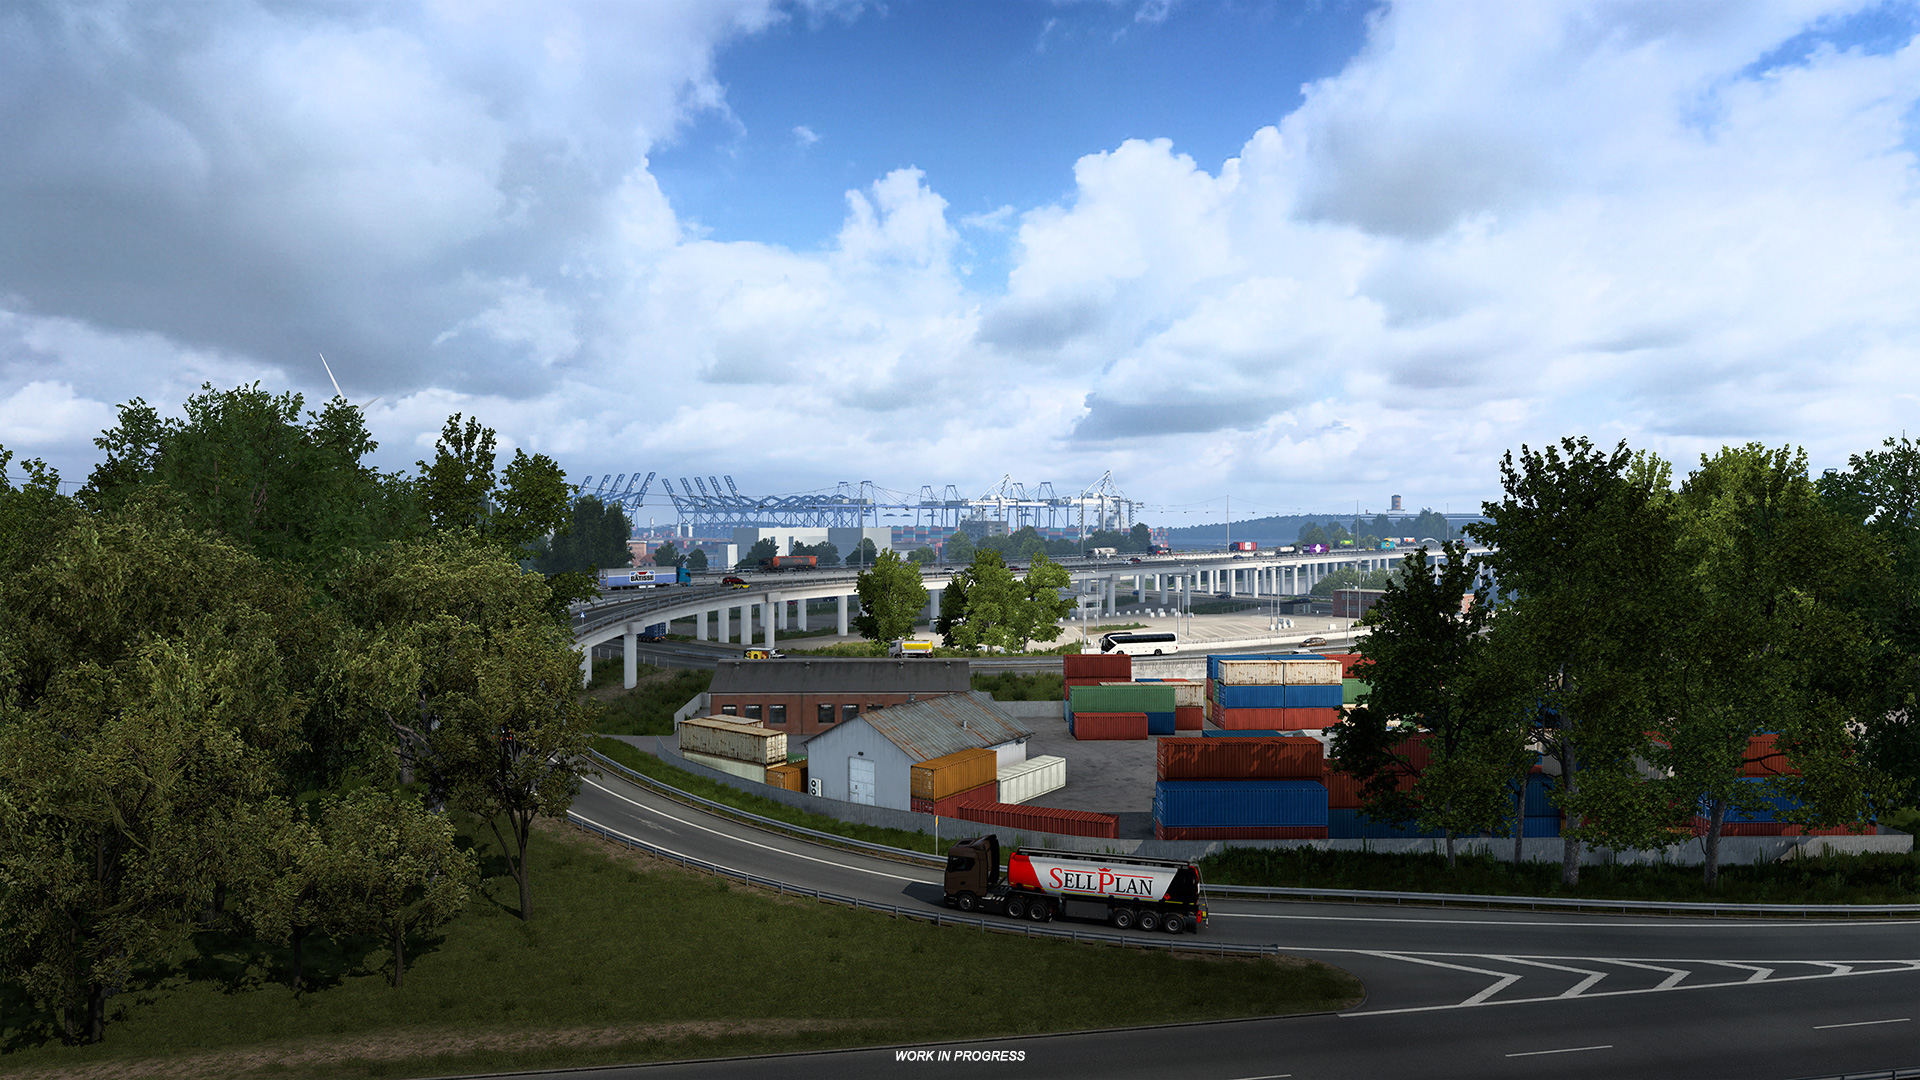 New Euro Truck Simulator 2 Open Beta available now, adds free new map  content